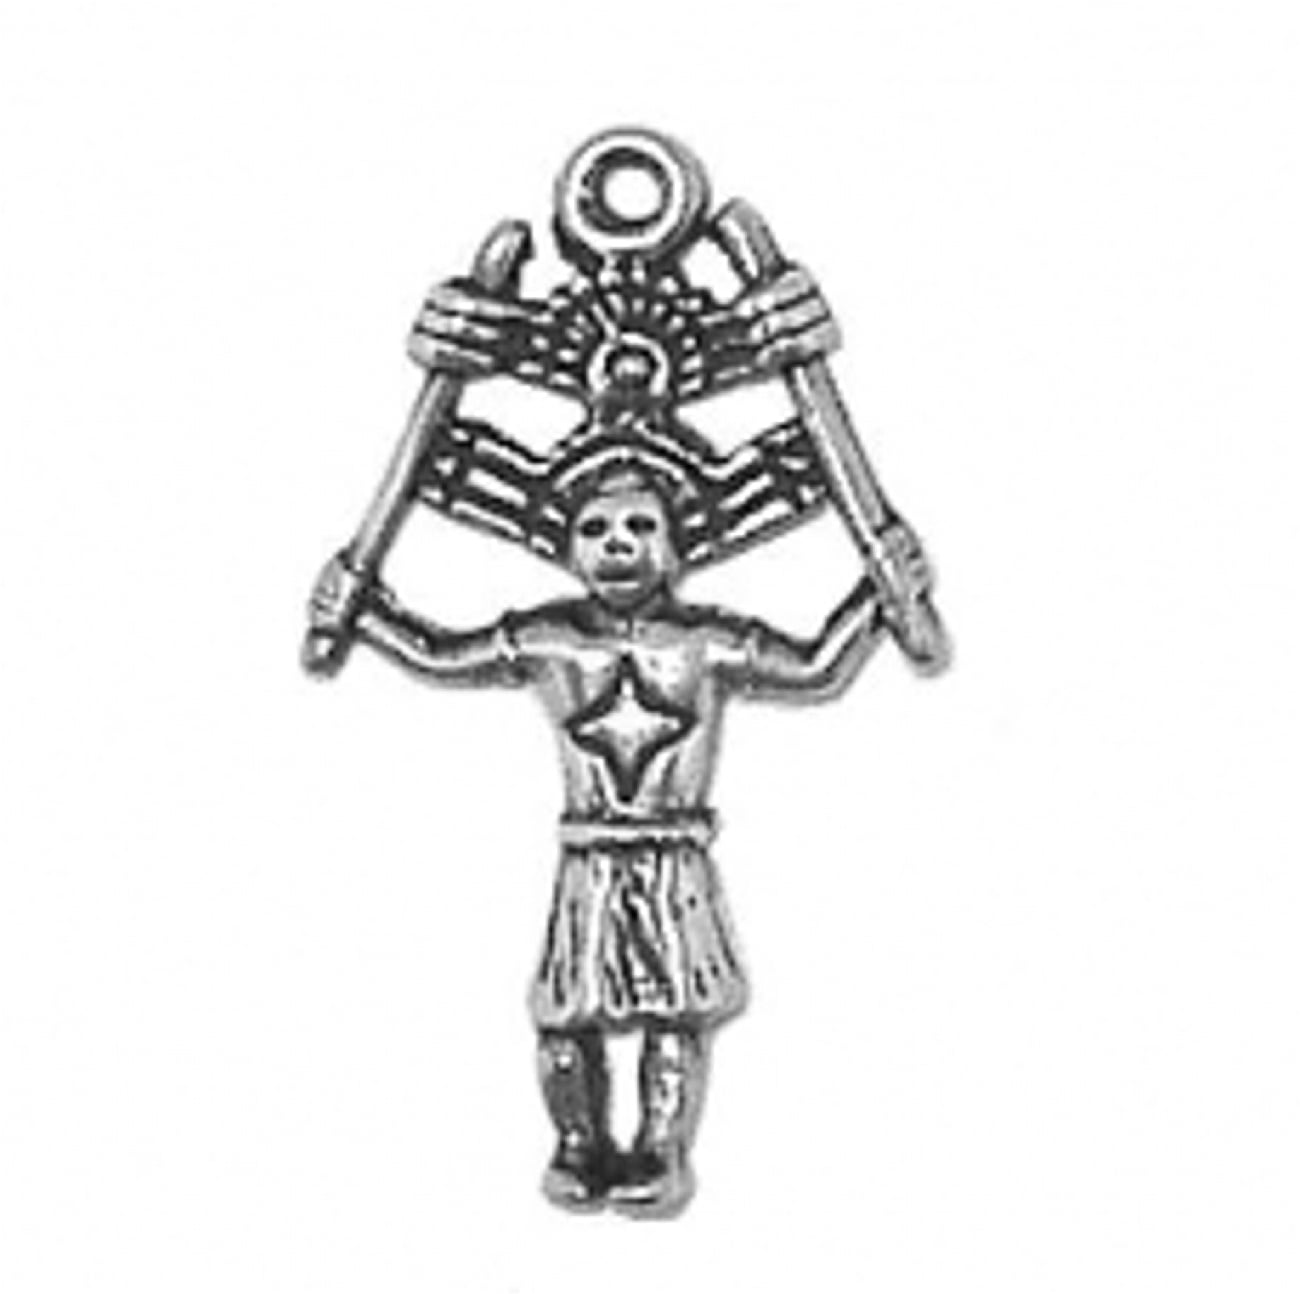 3D BUTTERFLY KACHINA Native American Indian doll Charm Pendant STERLING SILVER